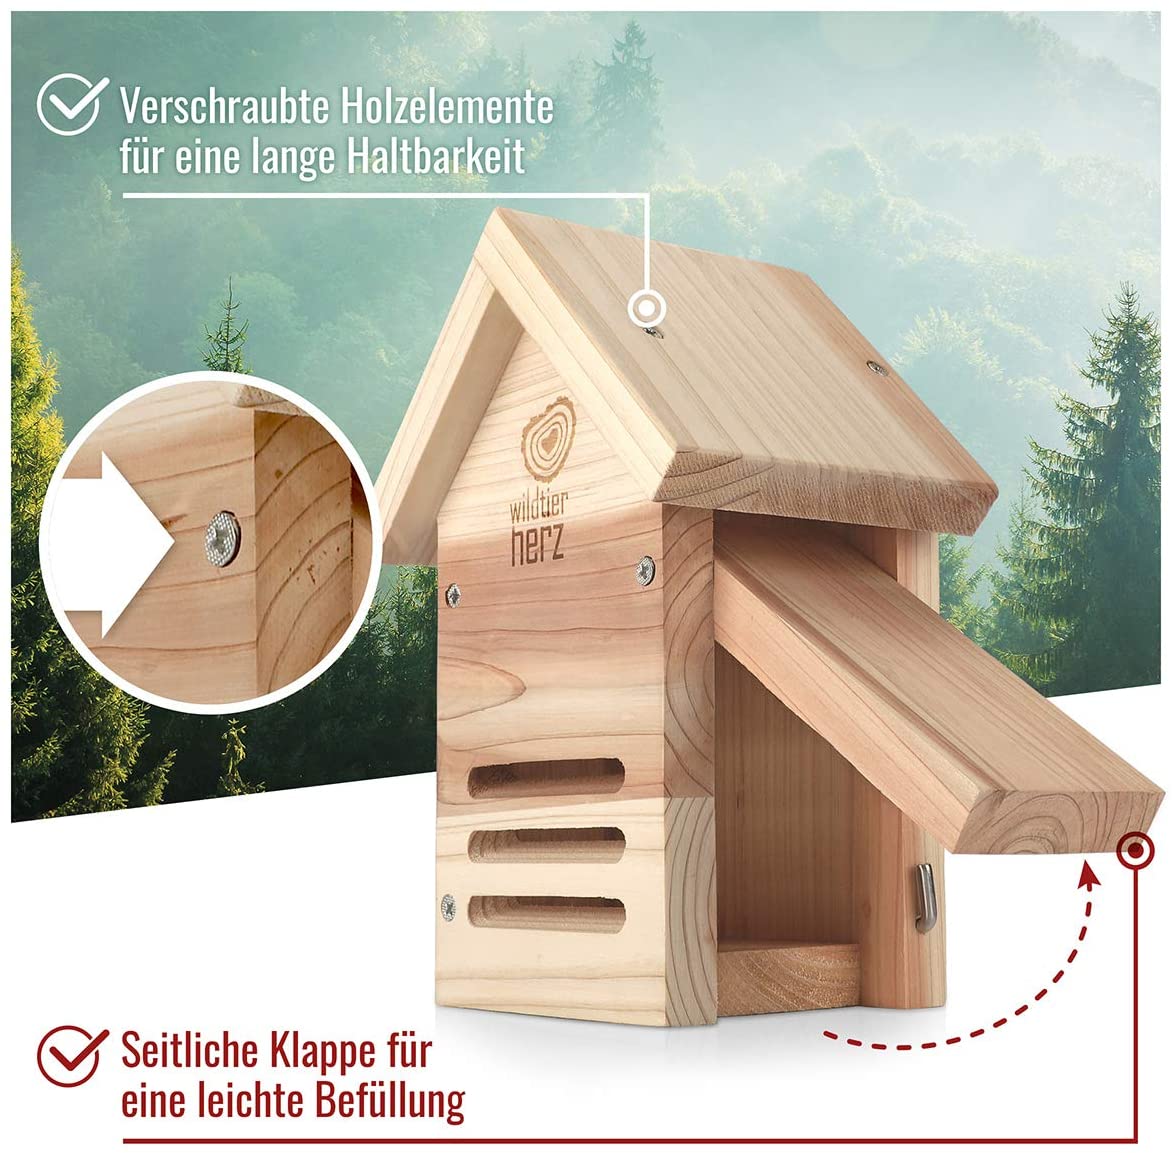 wildtier herz Ladybird House – Wooden Insect Hotel, Weatherproof, Made from  Untreated FSC Wood, Nest Nesting Box, Ladybird House for Garden – BigaMart